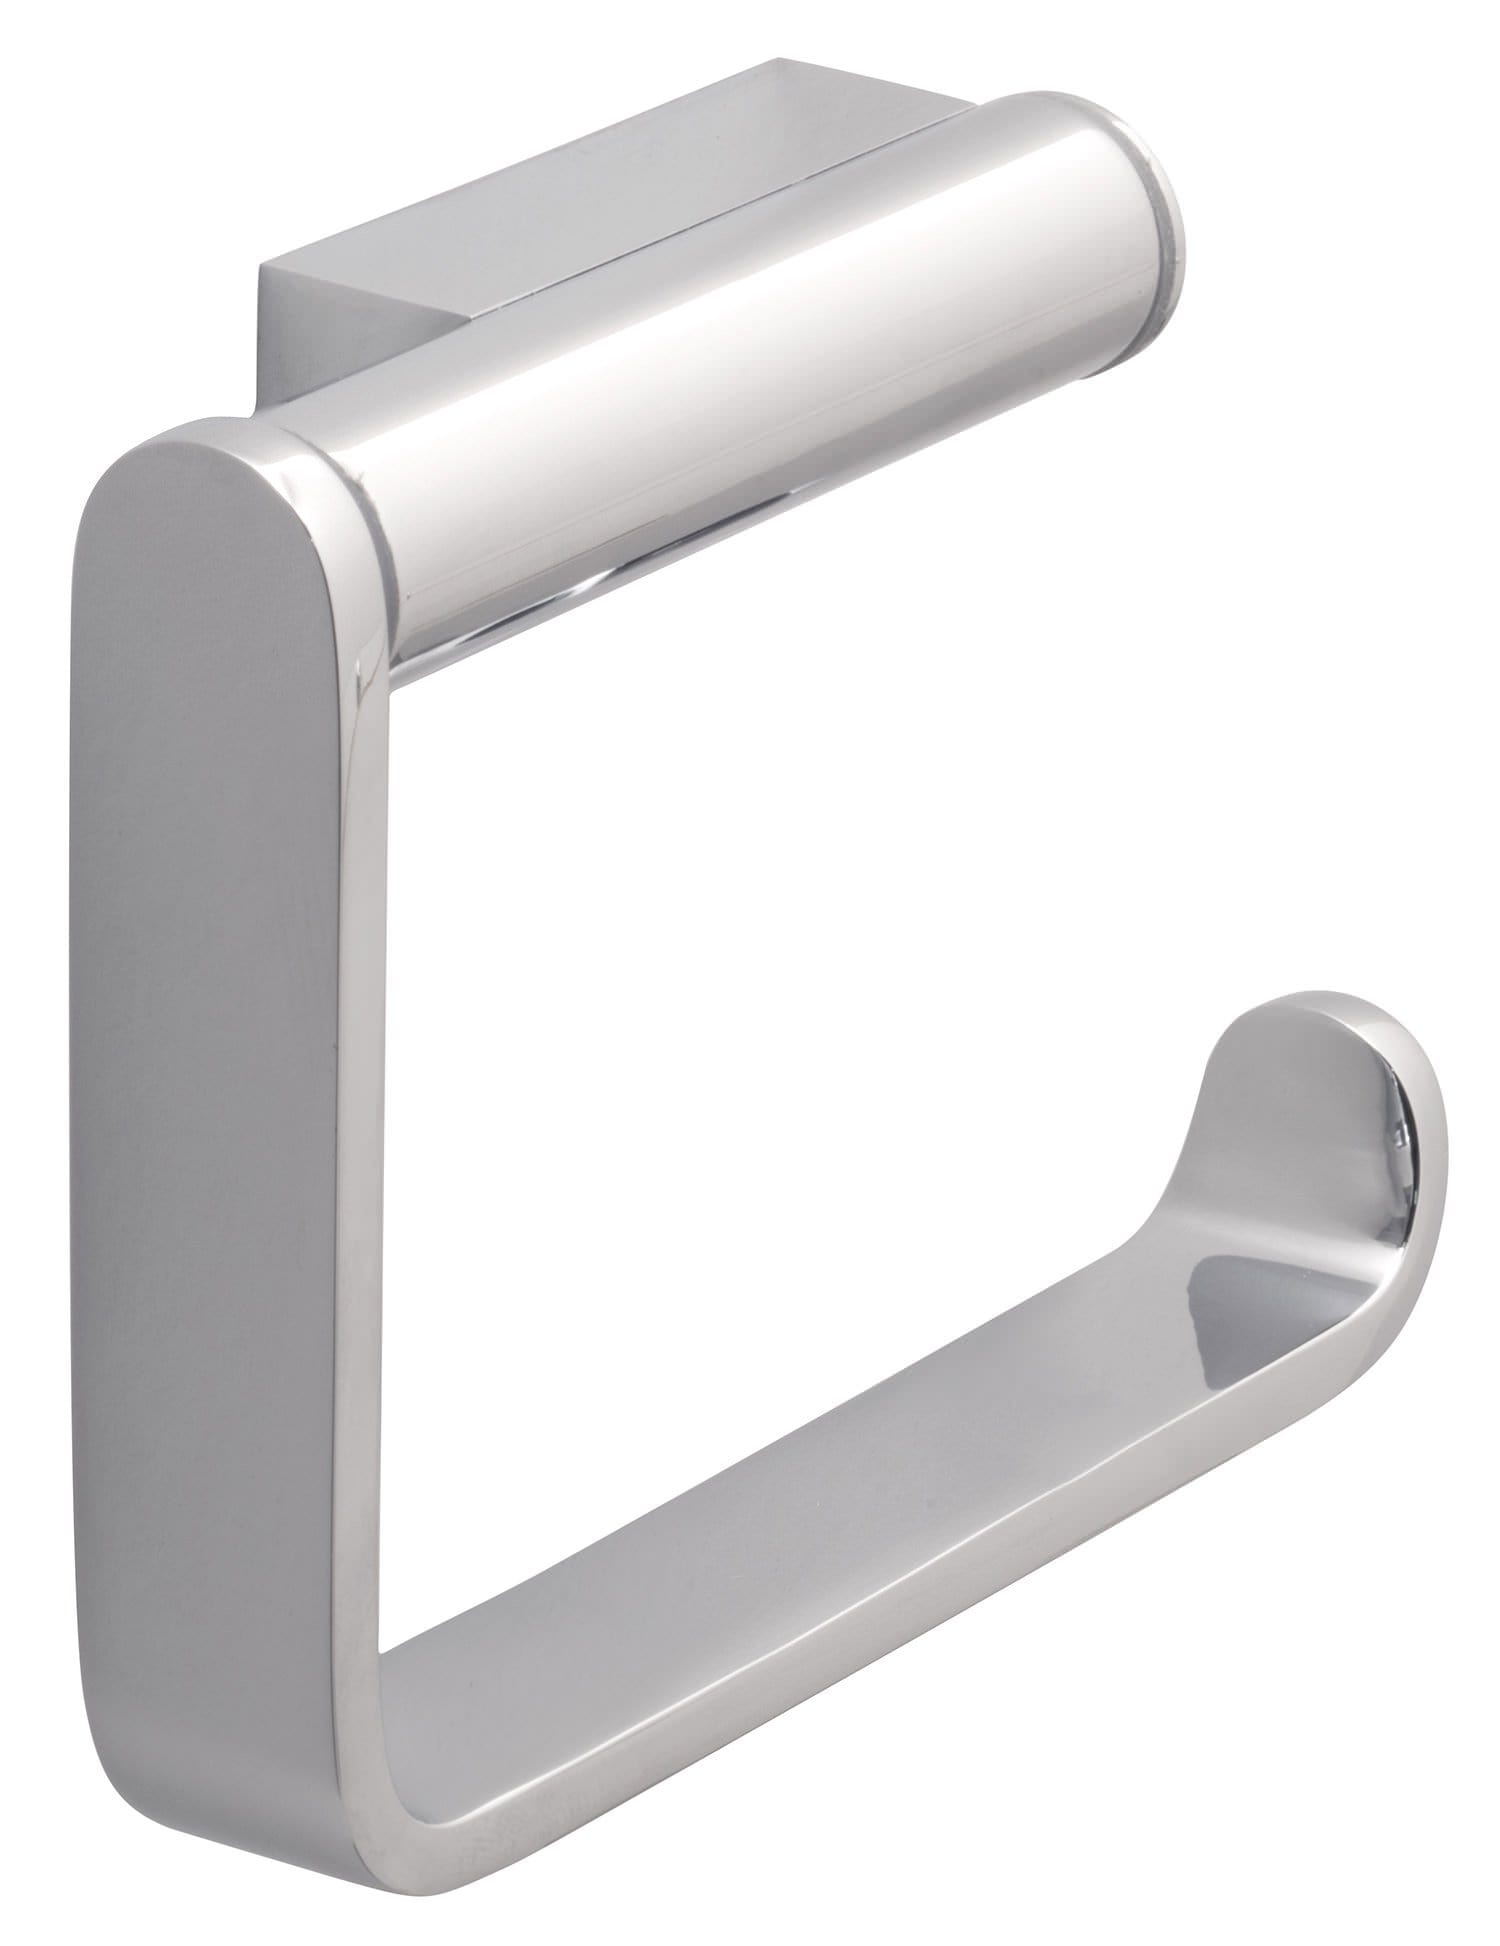 Vado Infinity Open Toilet Paper Holder - INF-180-C-P | Supply Master | Accra, Ghana Building Material Building Steel Engineering Hardware tool